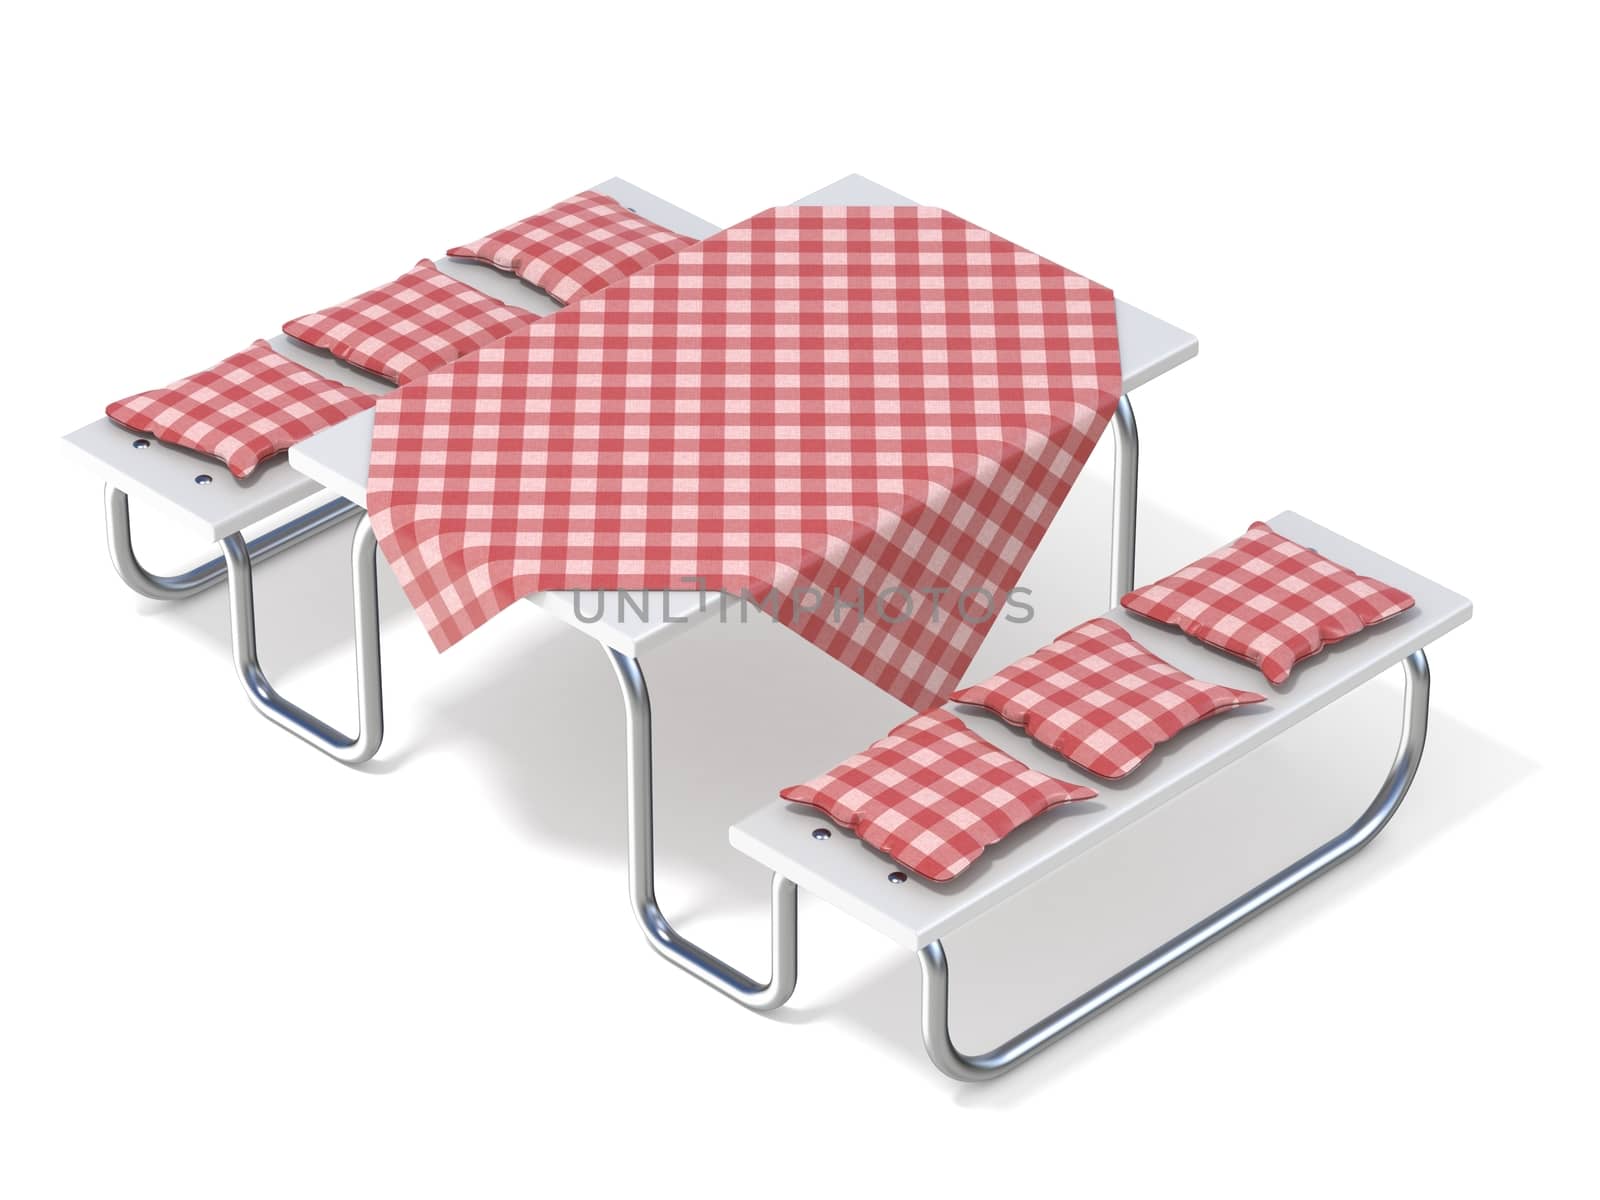 Picnic table with red table cover and pillows. 3D render illustration isolated on white background